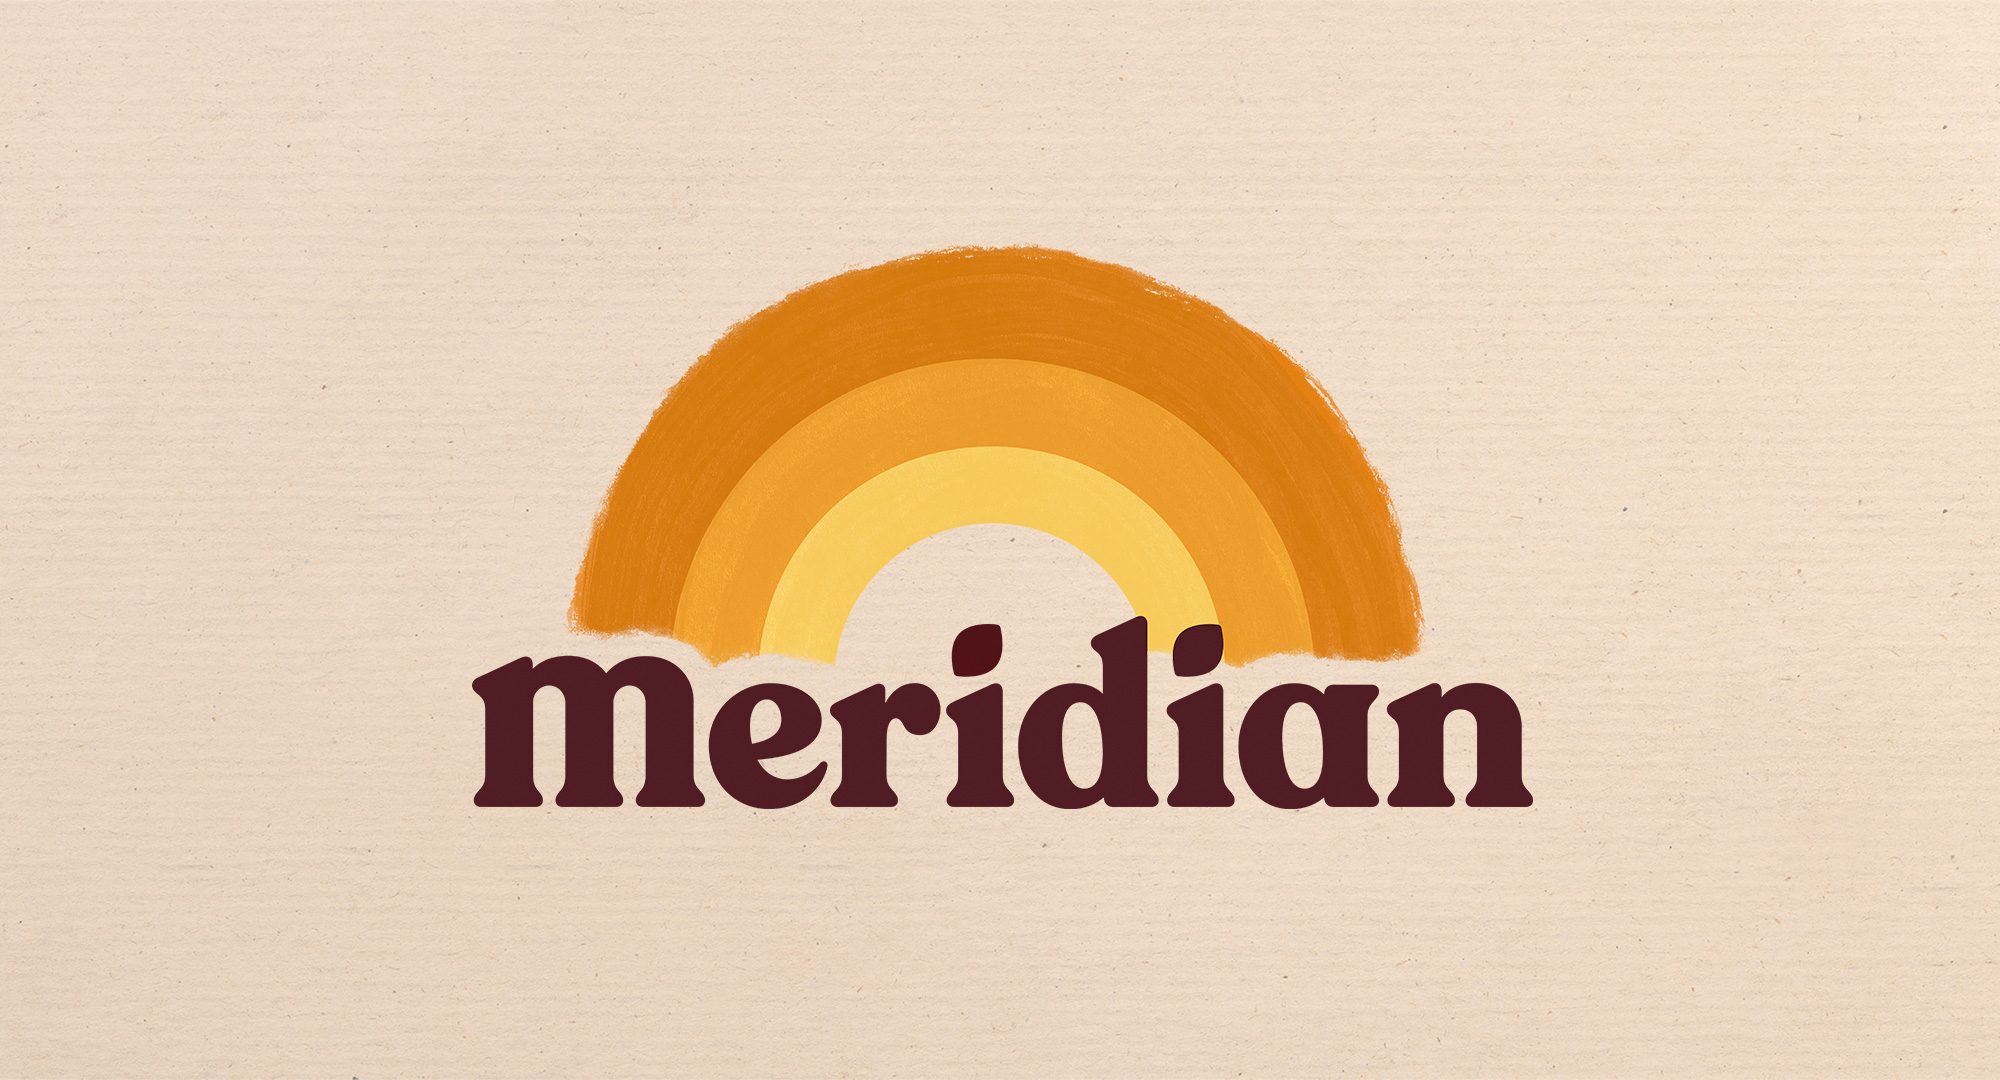 New Logo and Packaging for Meridian by Bulletproof